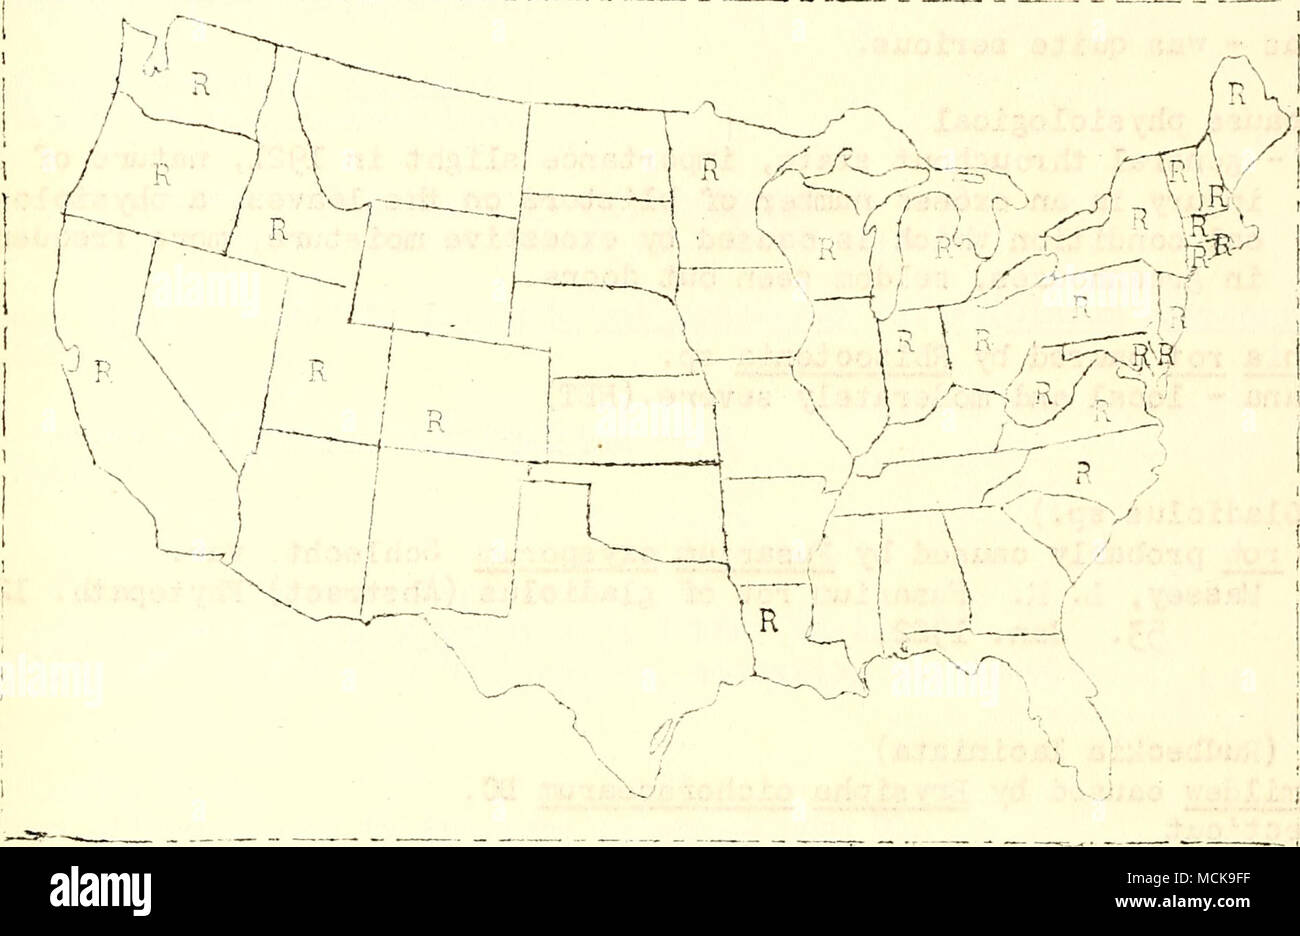 . Fig. 95- Geographical distribution of Pucca nia malvacearum on i^lthea rosea in the U. S,, as reported to the Plant Disease Survey . Leaf spot caused by Cerco spora althaeina Sacc. Delav/are, Minnesota. /mthracnose caused by Colletotrichum malvarum (B. &amp; C.) South. Delav/are - stem ard leaf infection. Root rot caused by Ozonium omnivorum Shear Texas - important, reduces the crop about 10%. HYDPviWGEA (Hydrangea hortensia) Leaf spot caused by Phyllosticta hydran^eae Ell. c; Ev. New York Frost in,jury Ohio IRIS (Iris spp.) Sclerotium caused by Sclerotium rolfsii Sacc. California - to all a Stock Photo